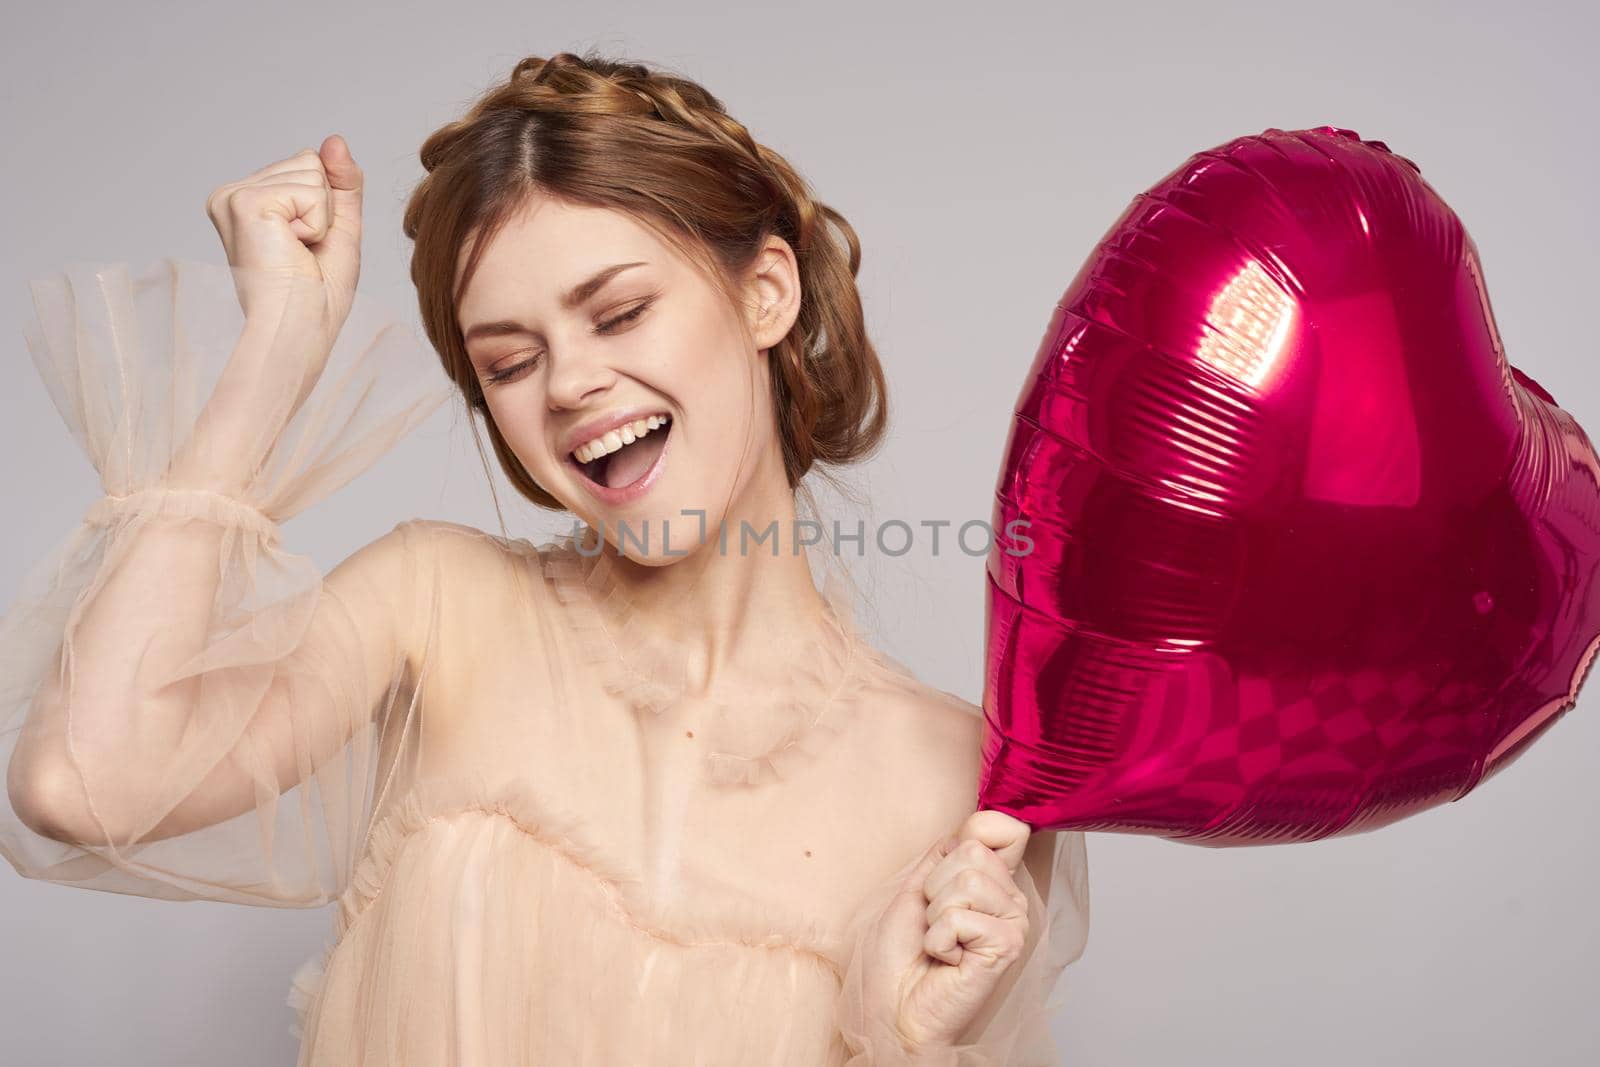 portrait of a woman Birthday party gift heart balloon model studio. High quality photo